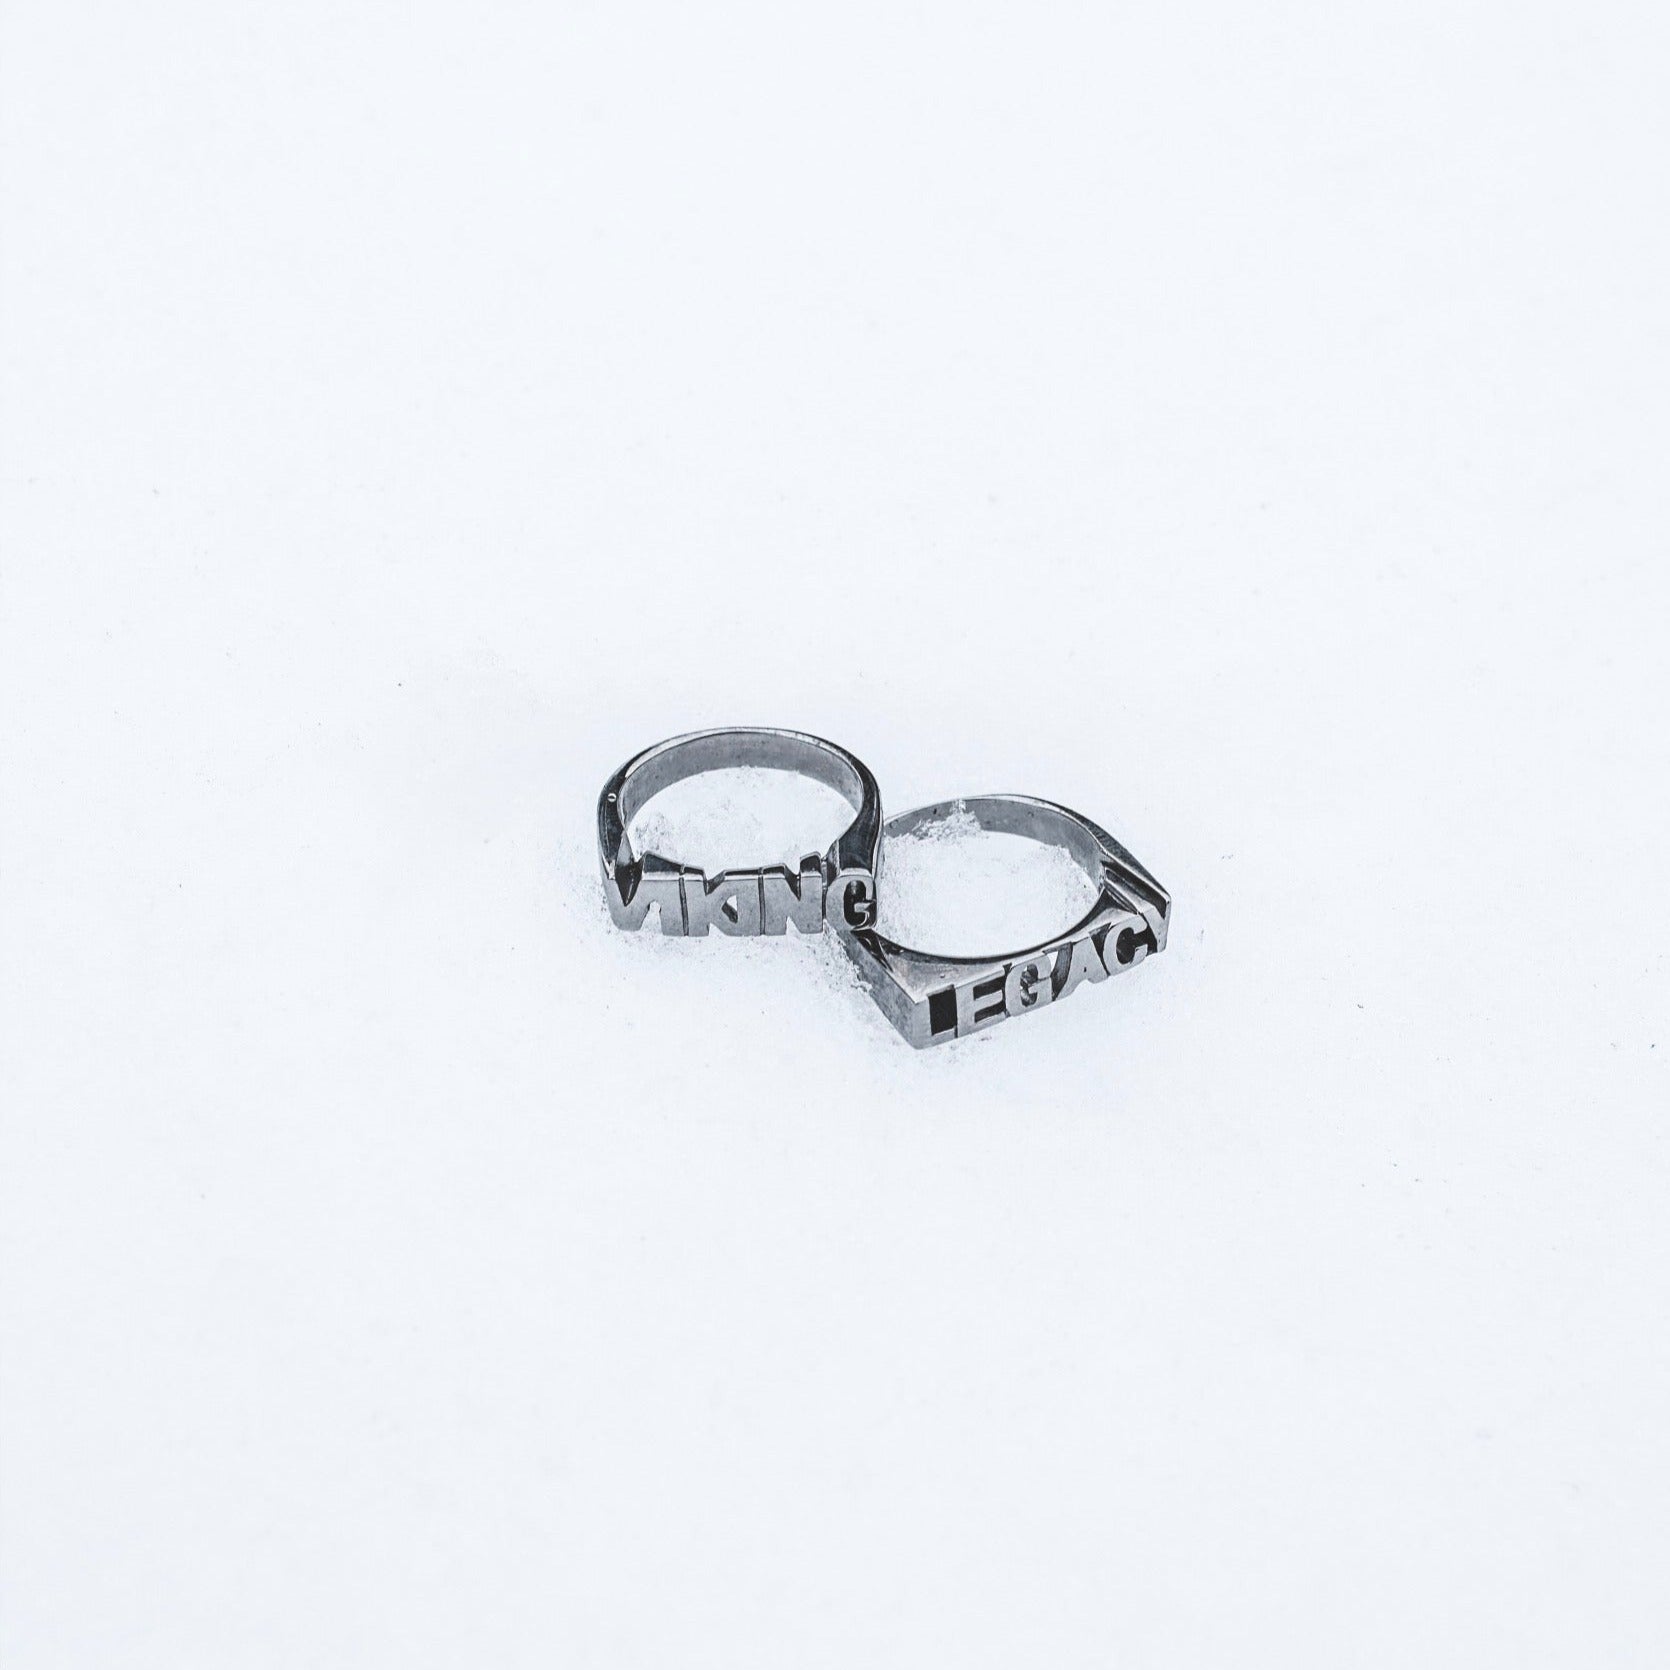 LEGACY Signature - Silver-toned ring